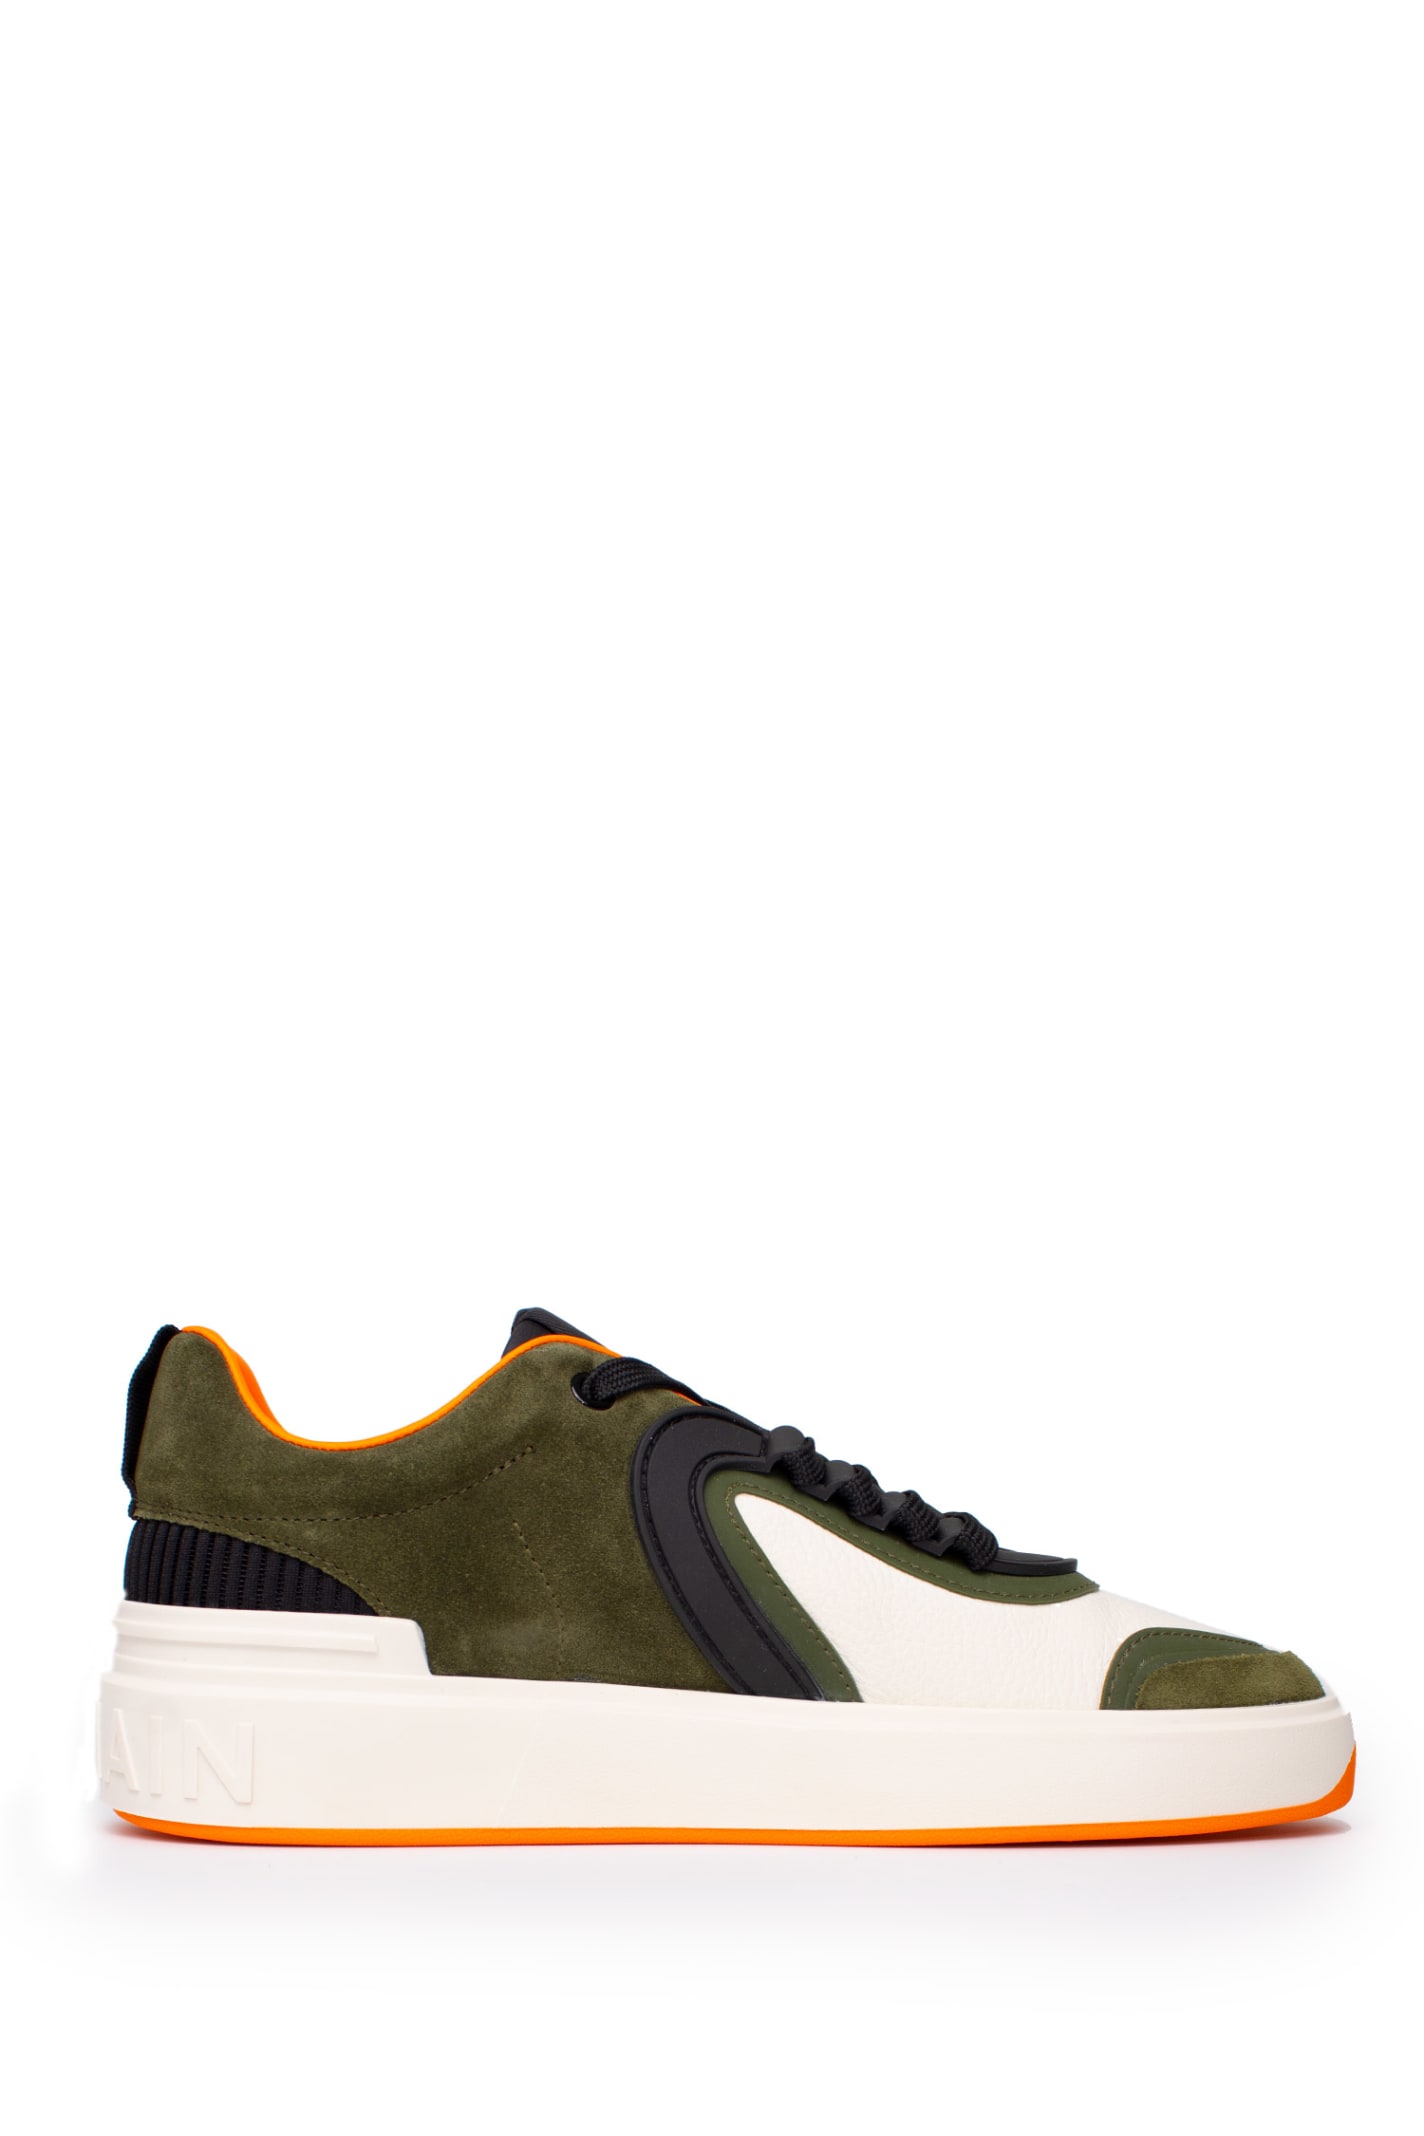 Balmain Kaki And White B-skate Sneakers In Calf Leather And Suede